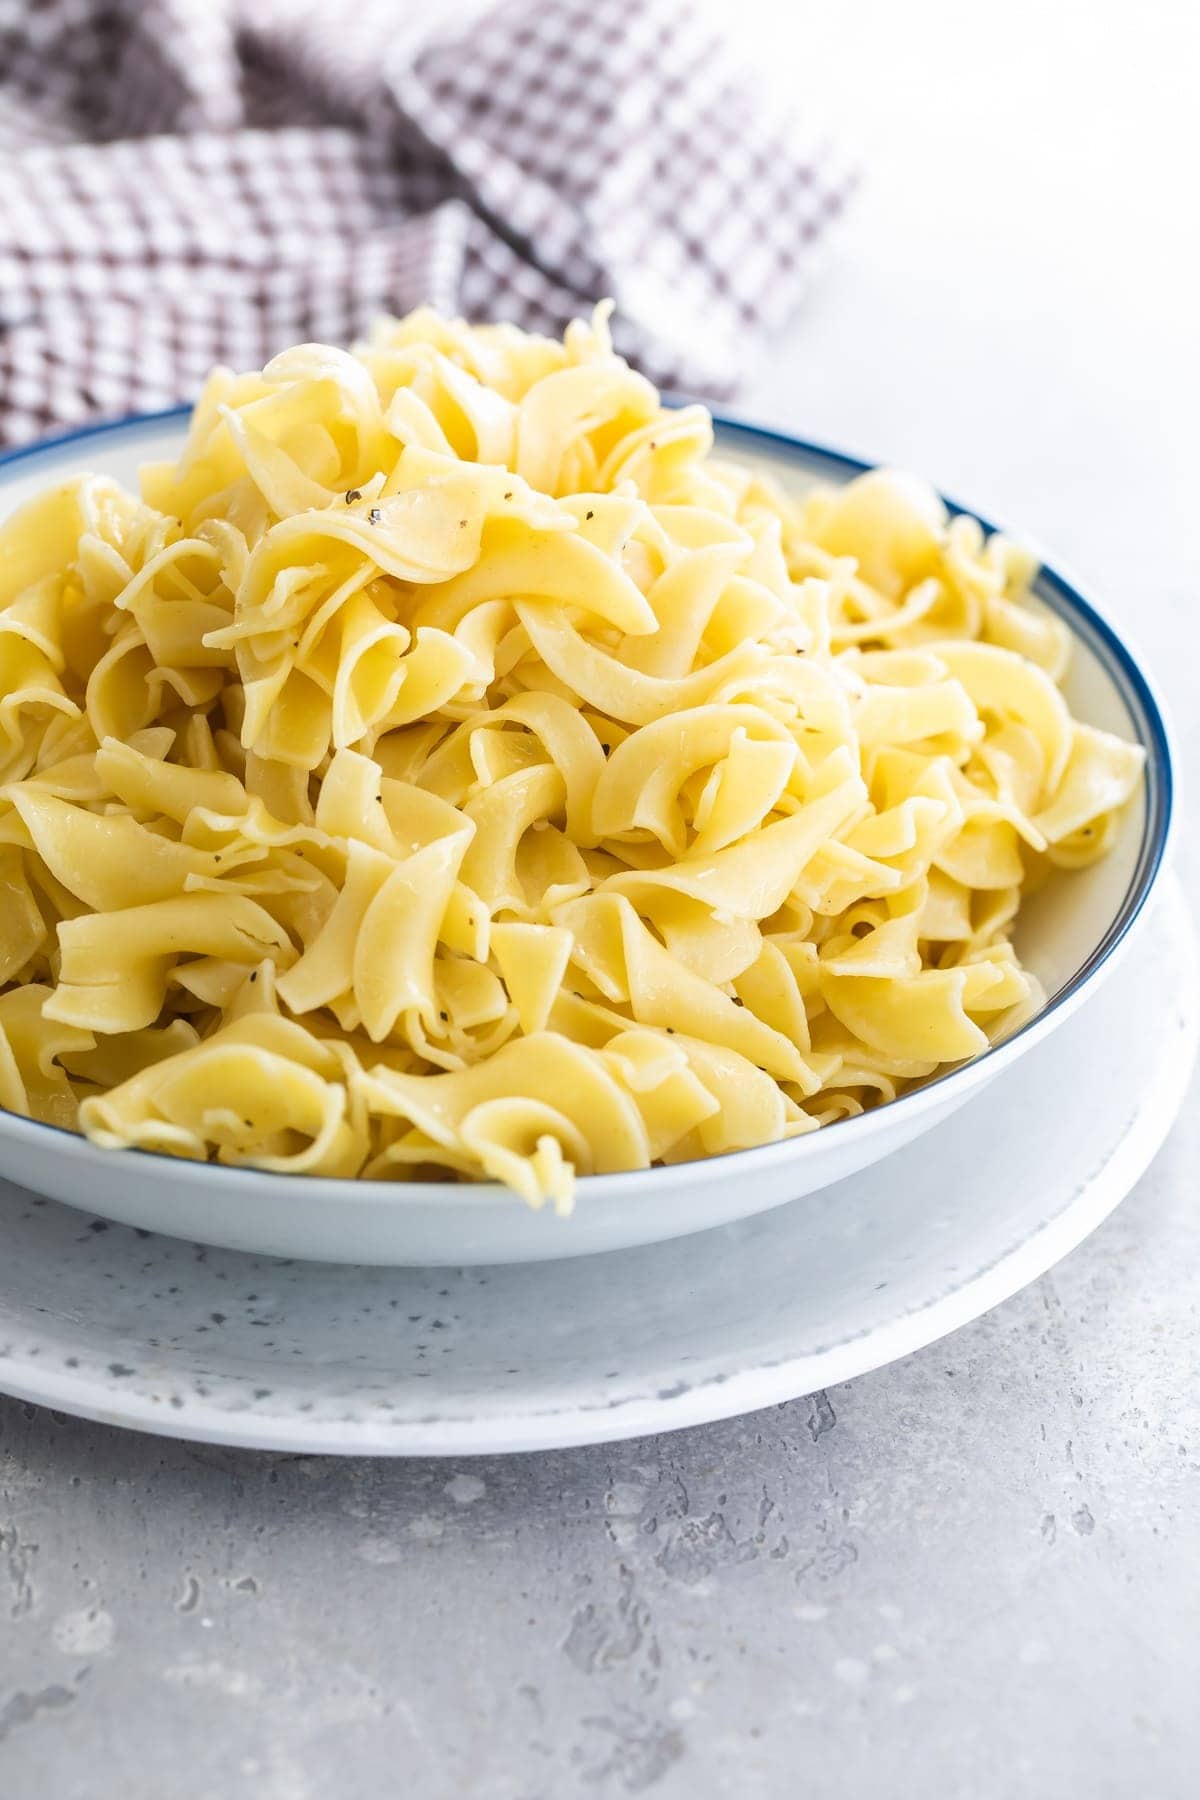 Homemade Buttered Noodles in a Plate